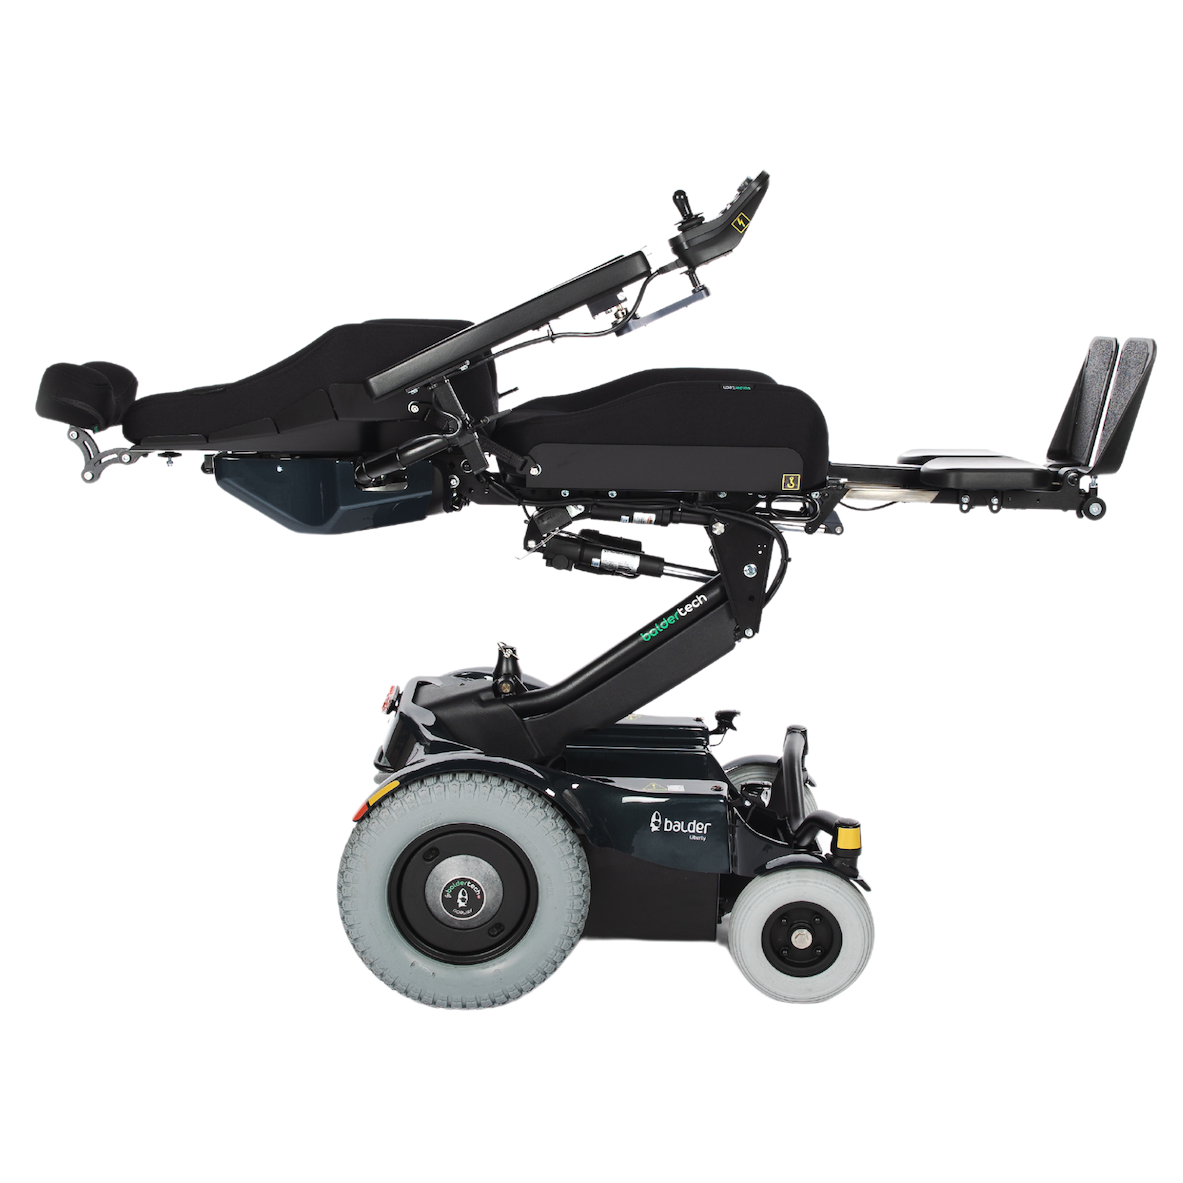 A side view of the Balder Liberty L380 powerchair in the laying flat position. A rear wheel drive electric wheelchair.